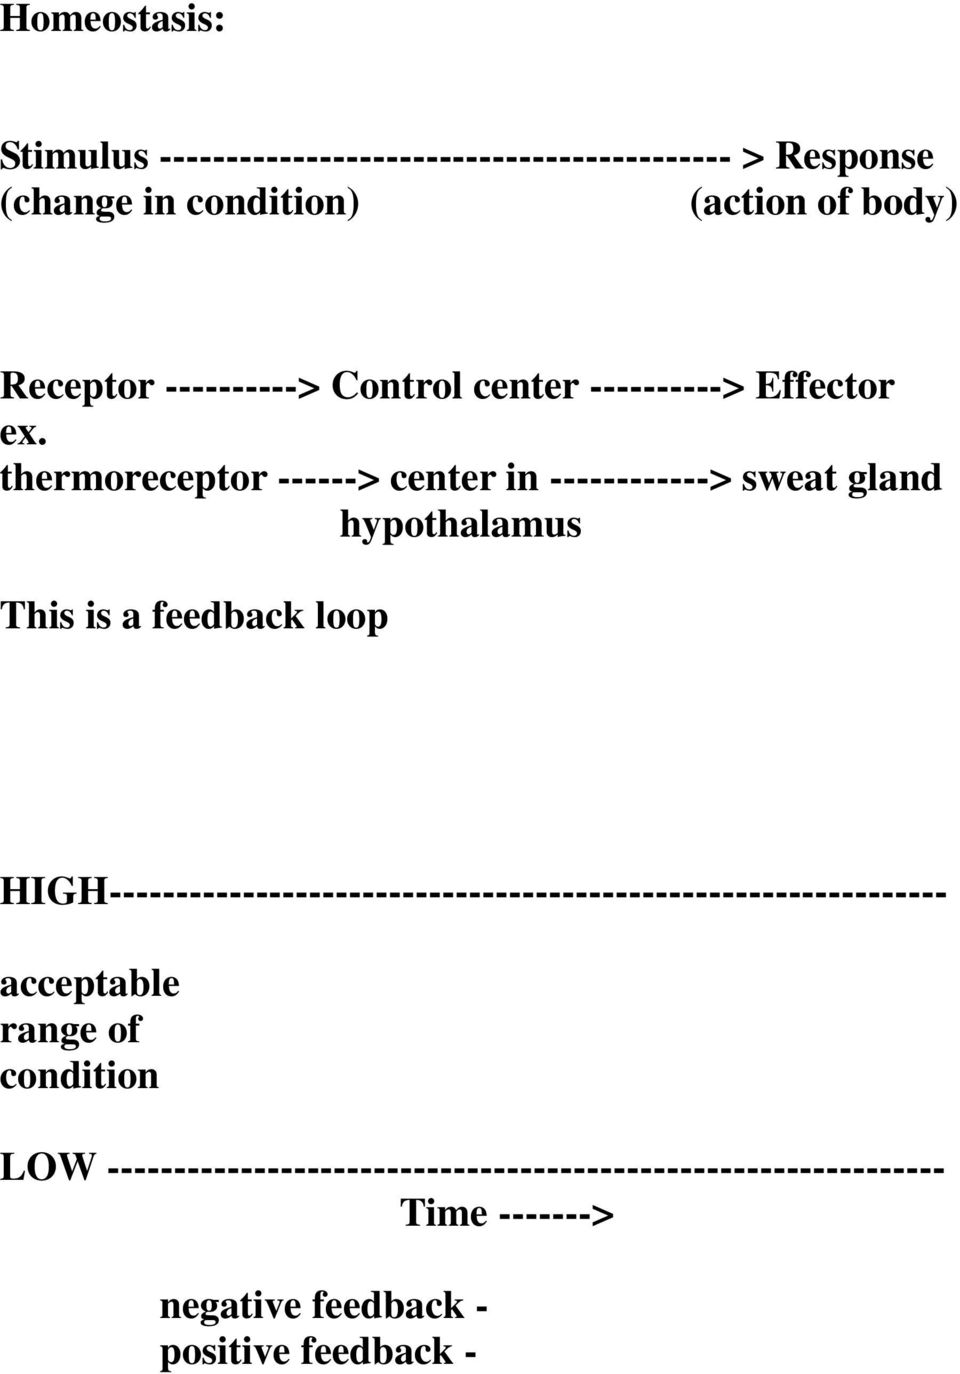 thermoreceptor ------> center in ------------> sweat gland hypothalamus This is a feedback loop